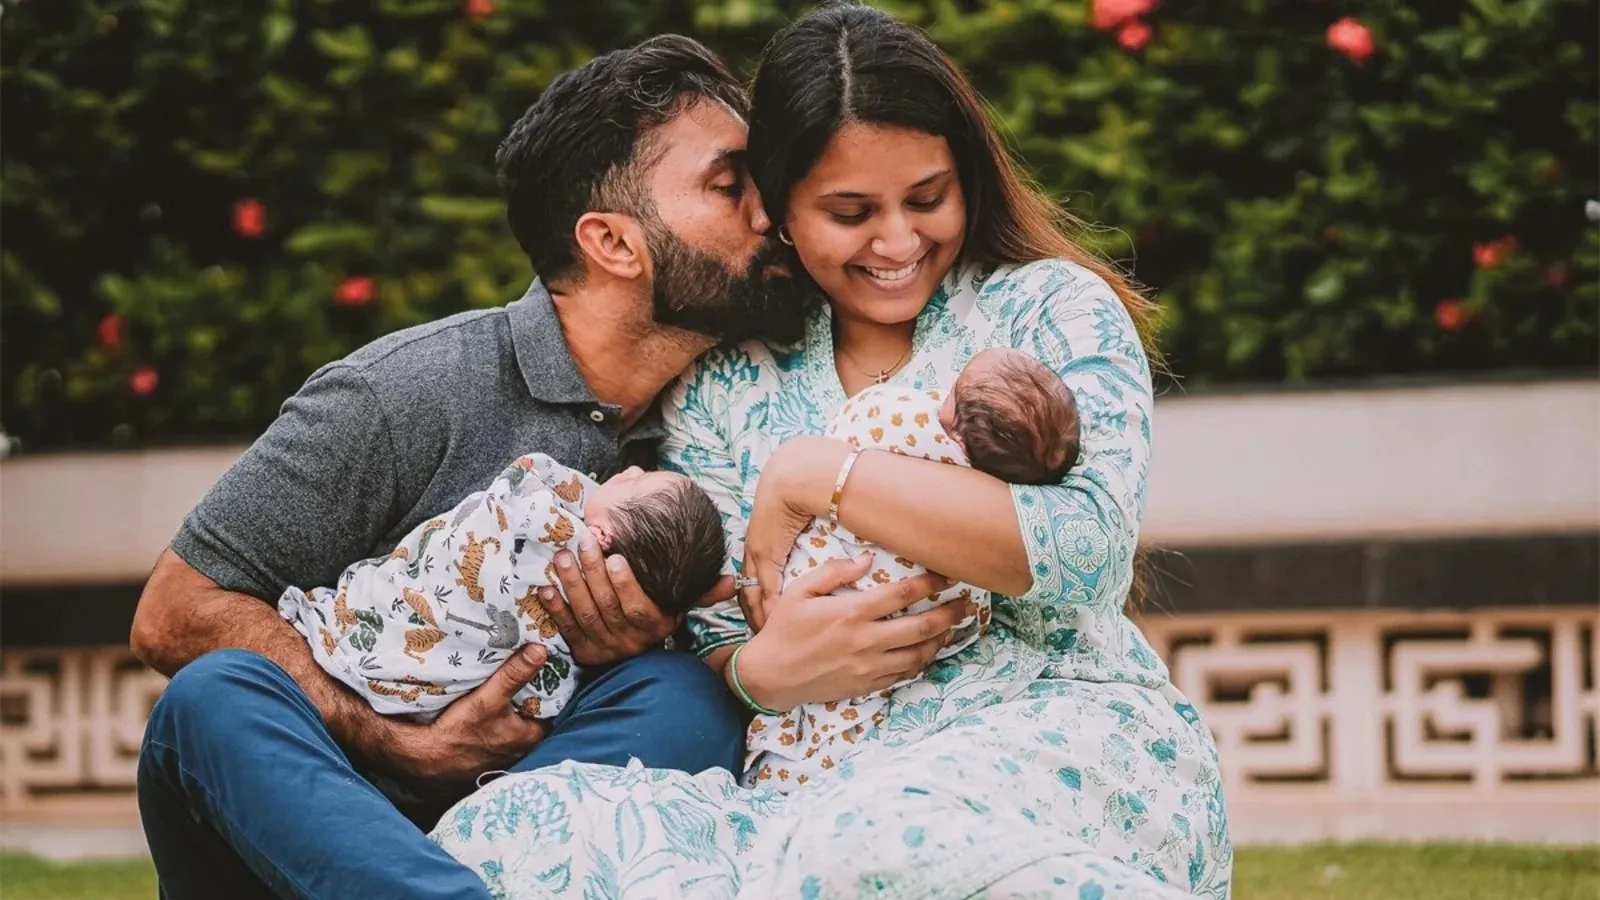 Dinesh and Dipika have two twin babies together.  